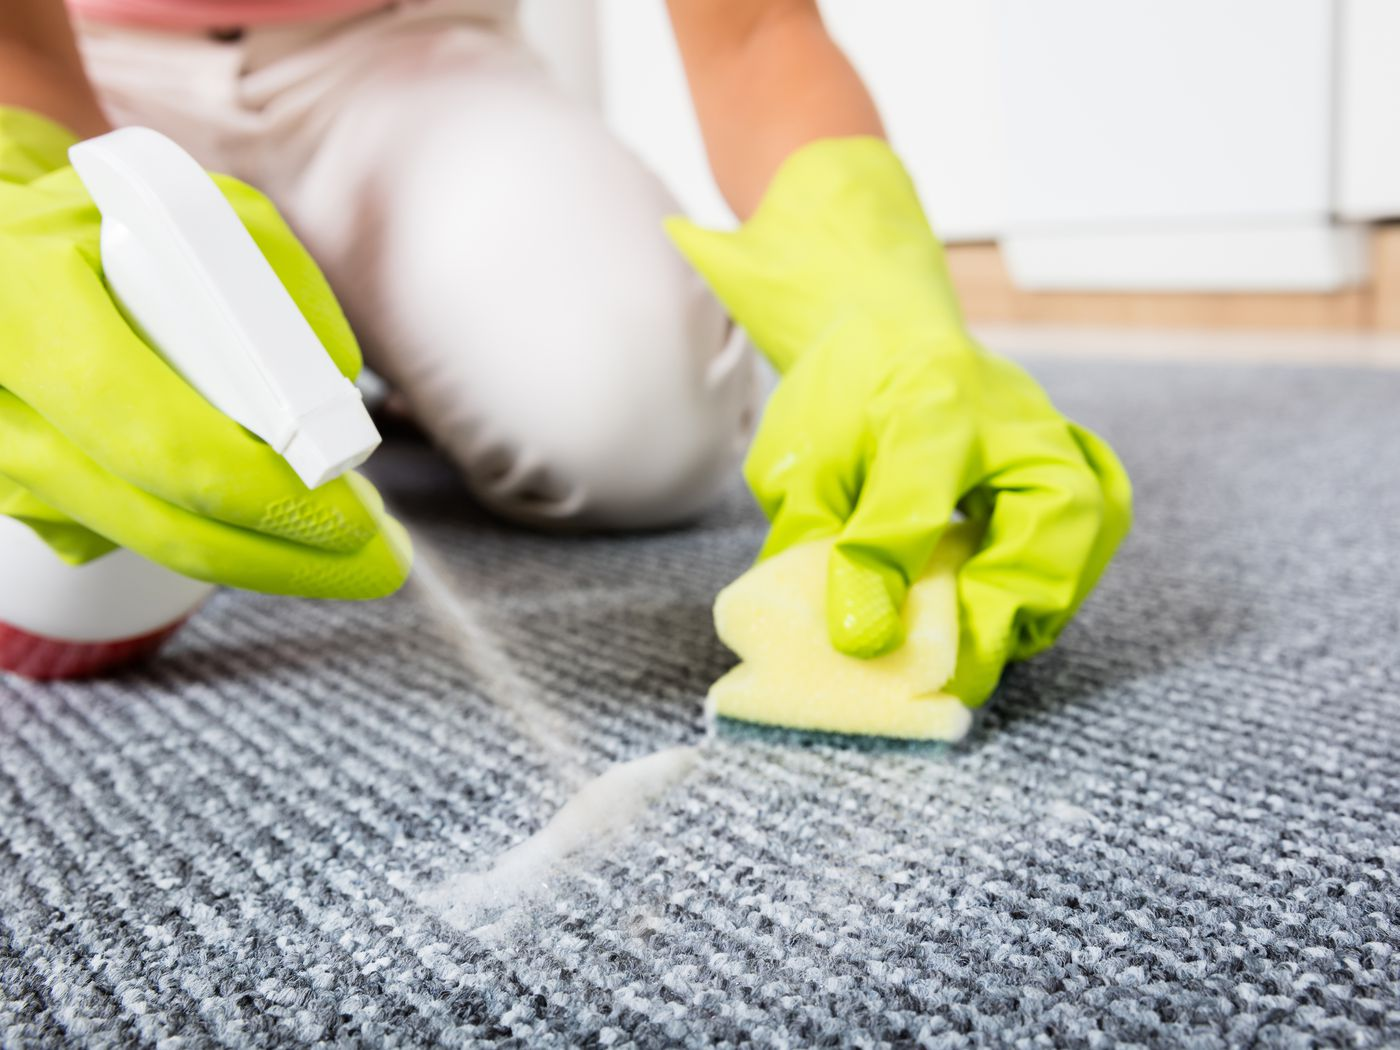 Using other solvents to remove gum from carpet